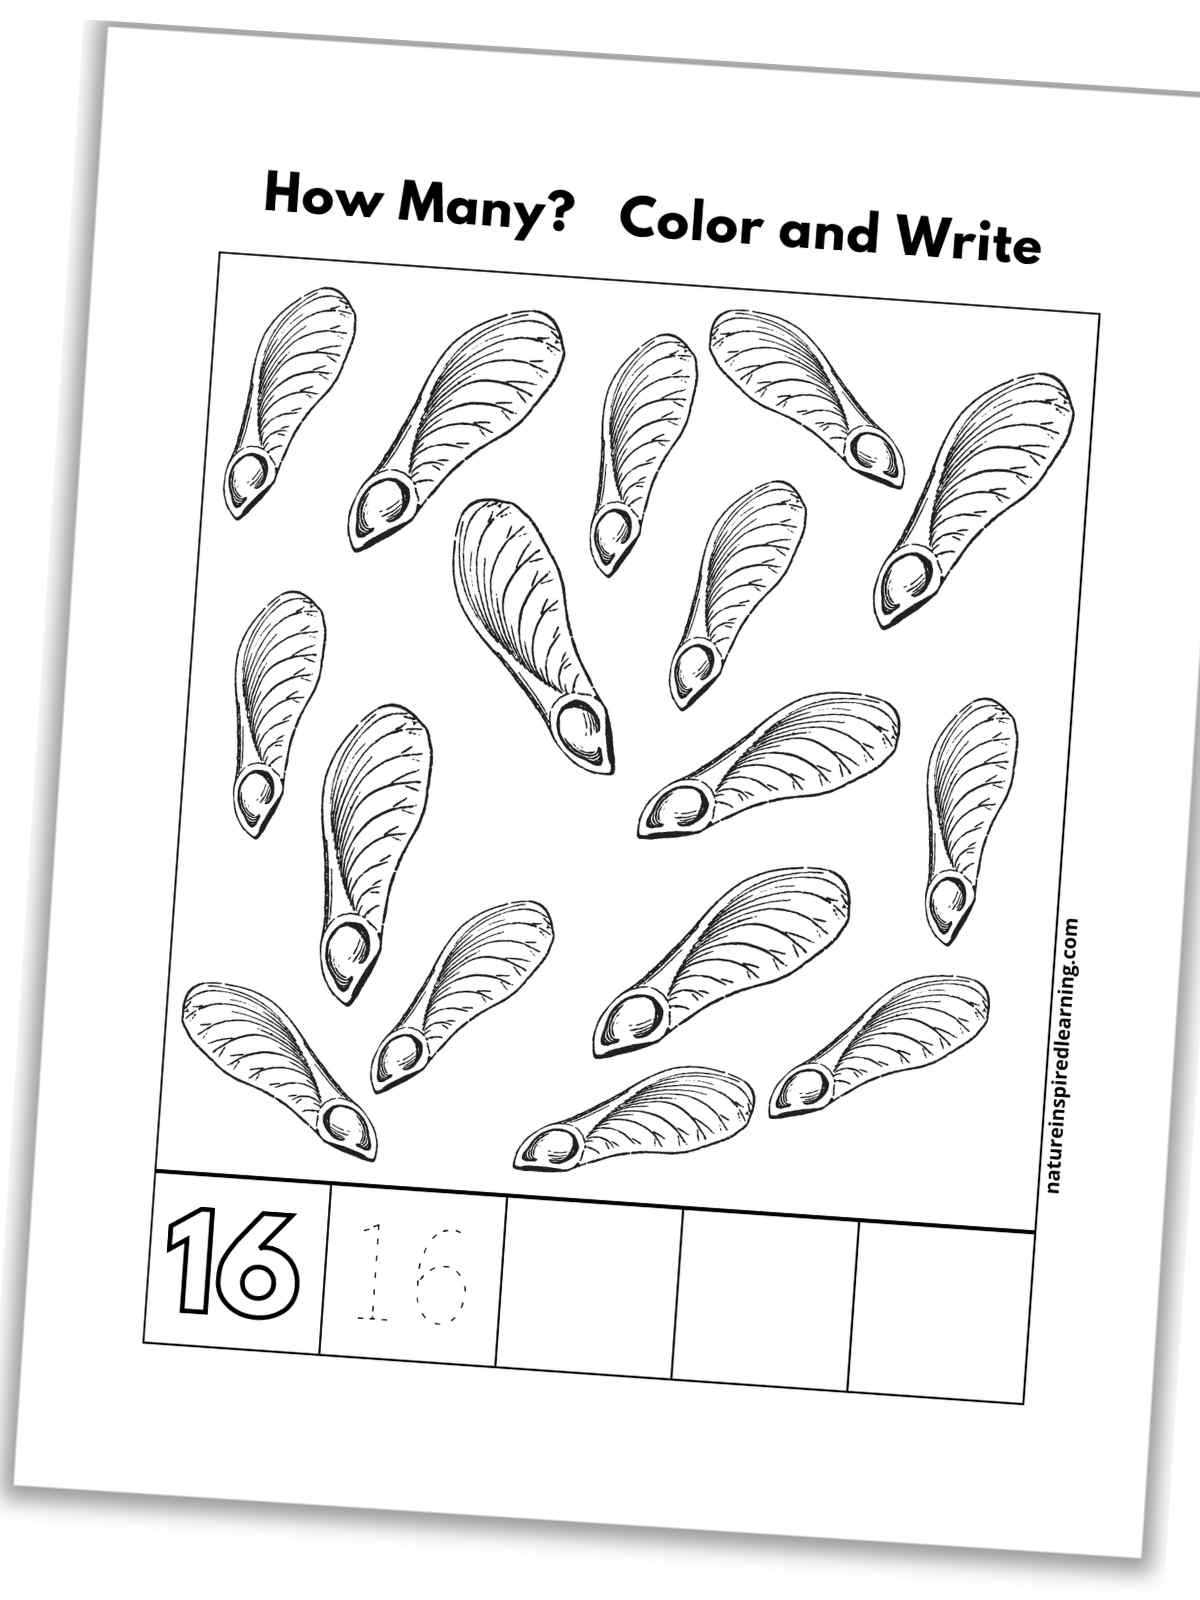 black and white number sixteen worksheet with seeds, outline of number 16, a traceable 16, and blank boxes slanted with a drop shadow